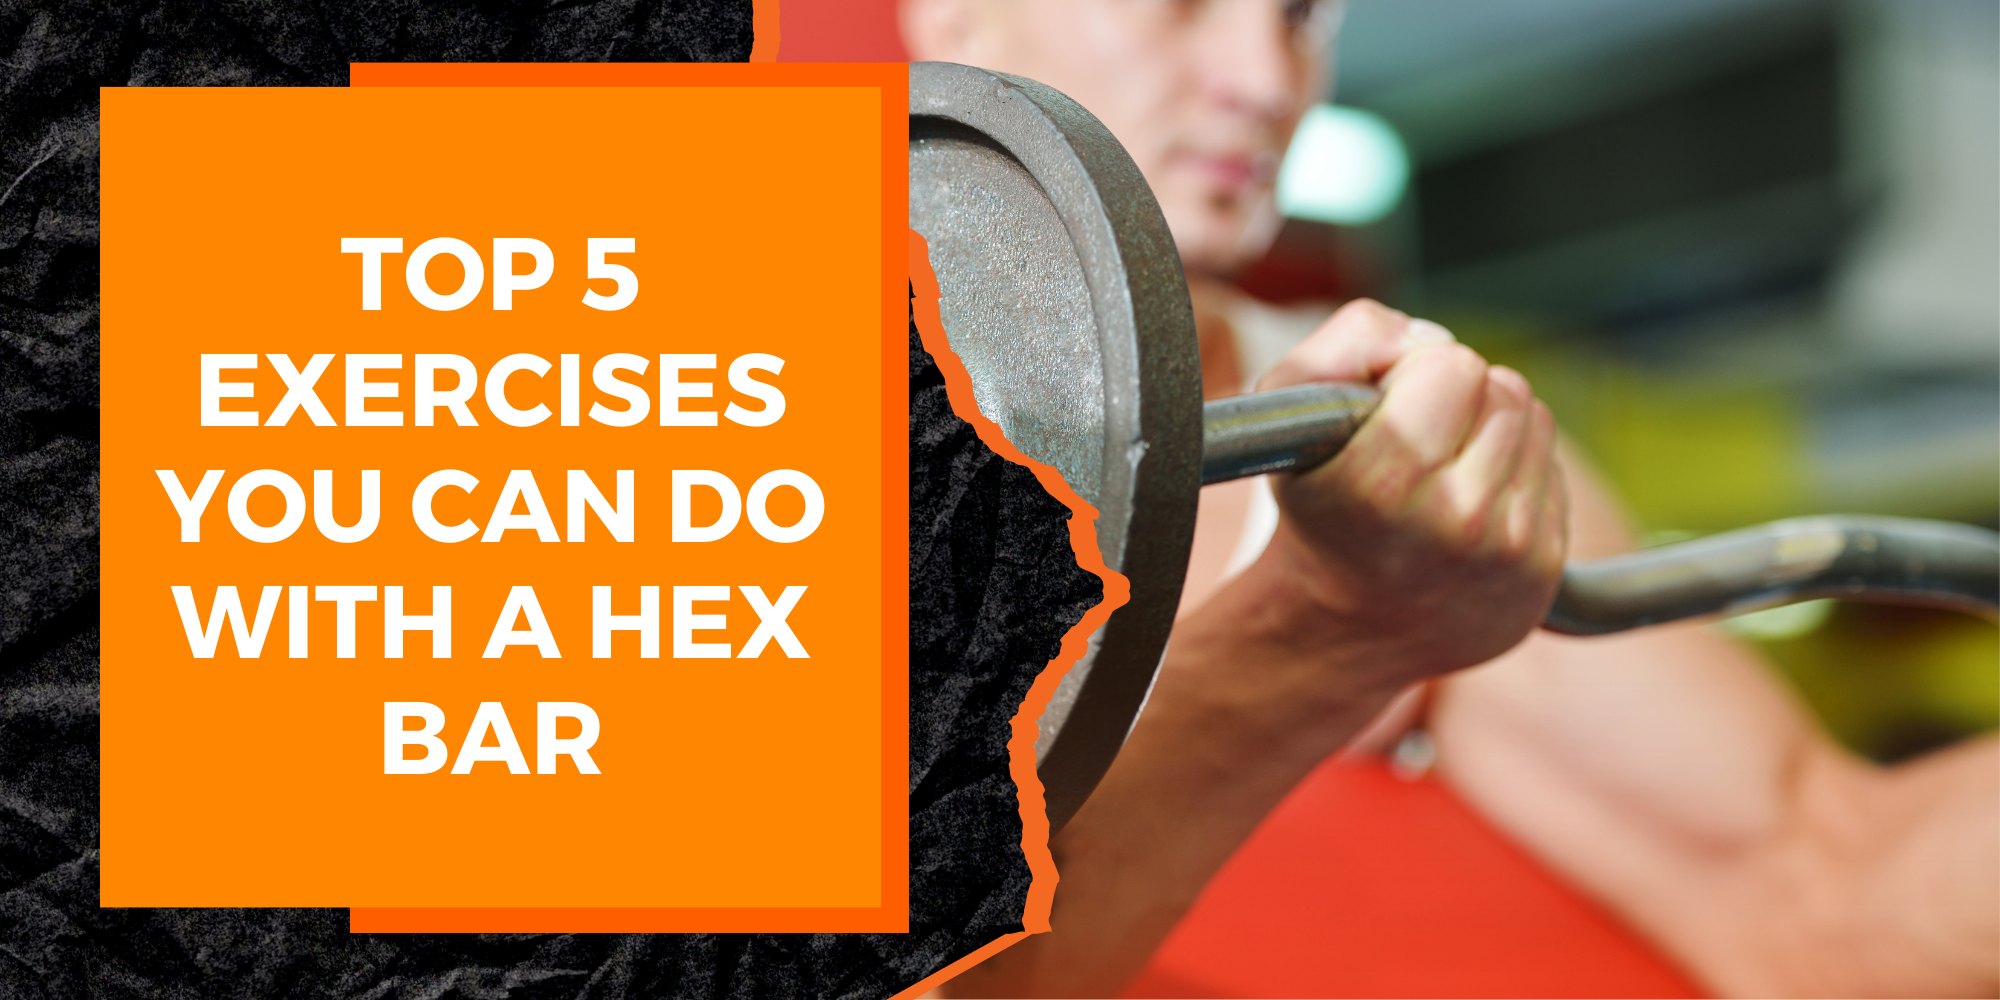 The Top 5 Exercises You Can Do with a Hex Bar